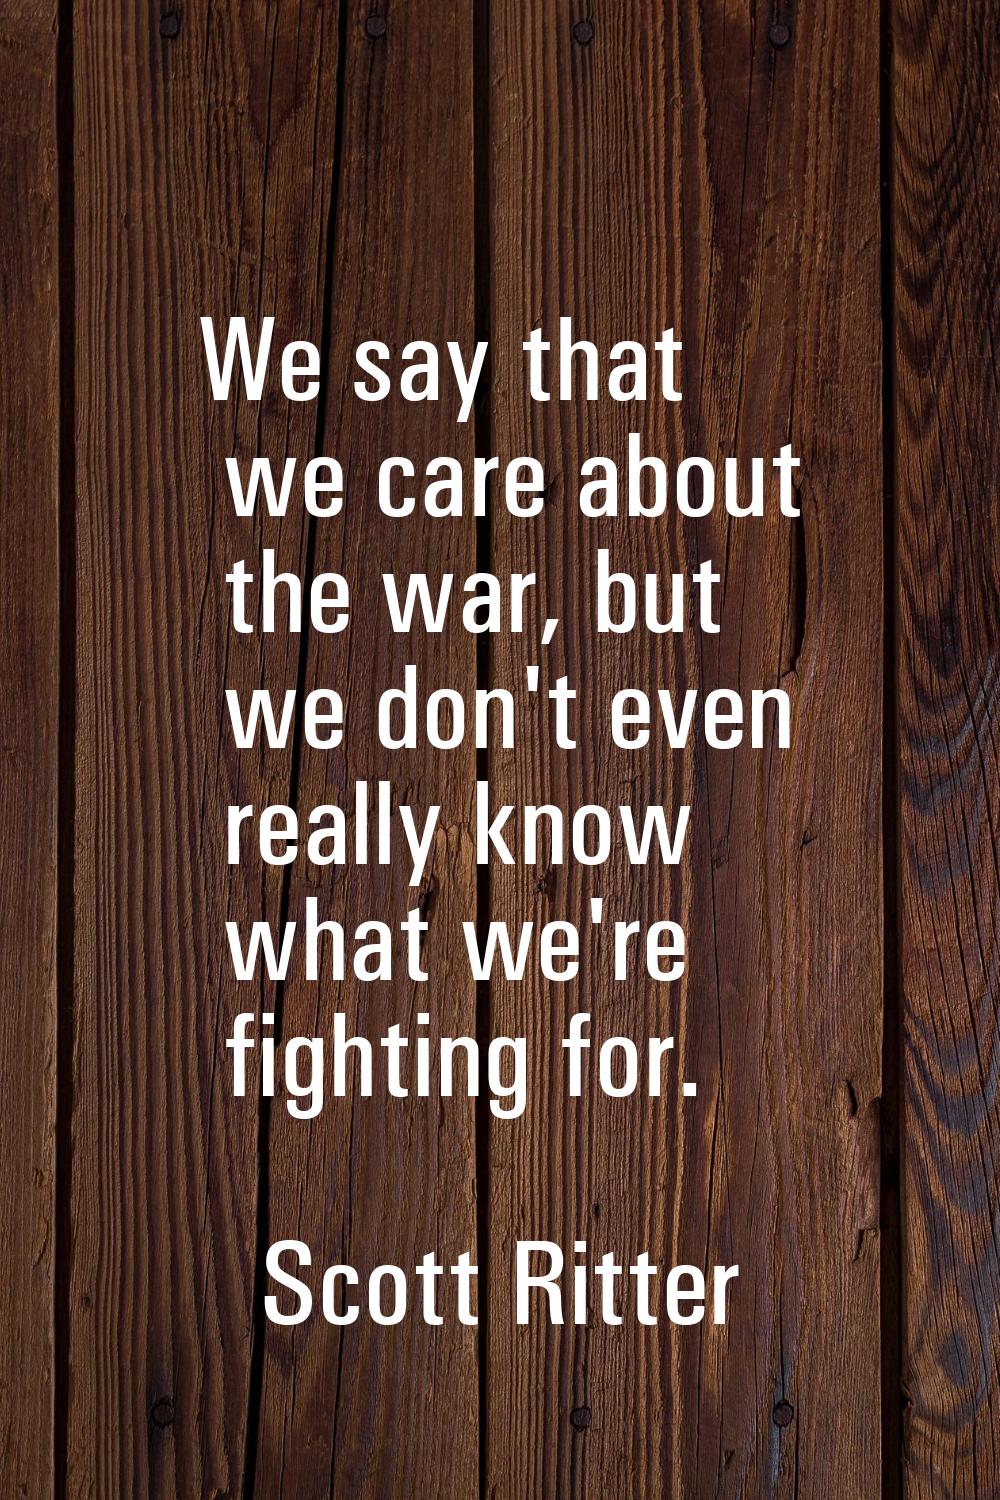 We say that we care about the war, but we don't even really know what we're fighting for.